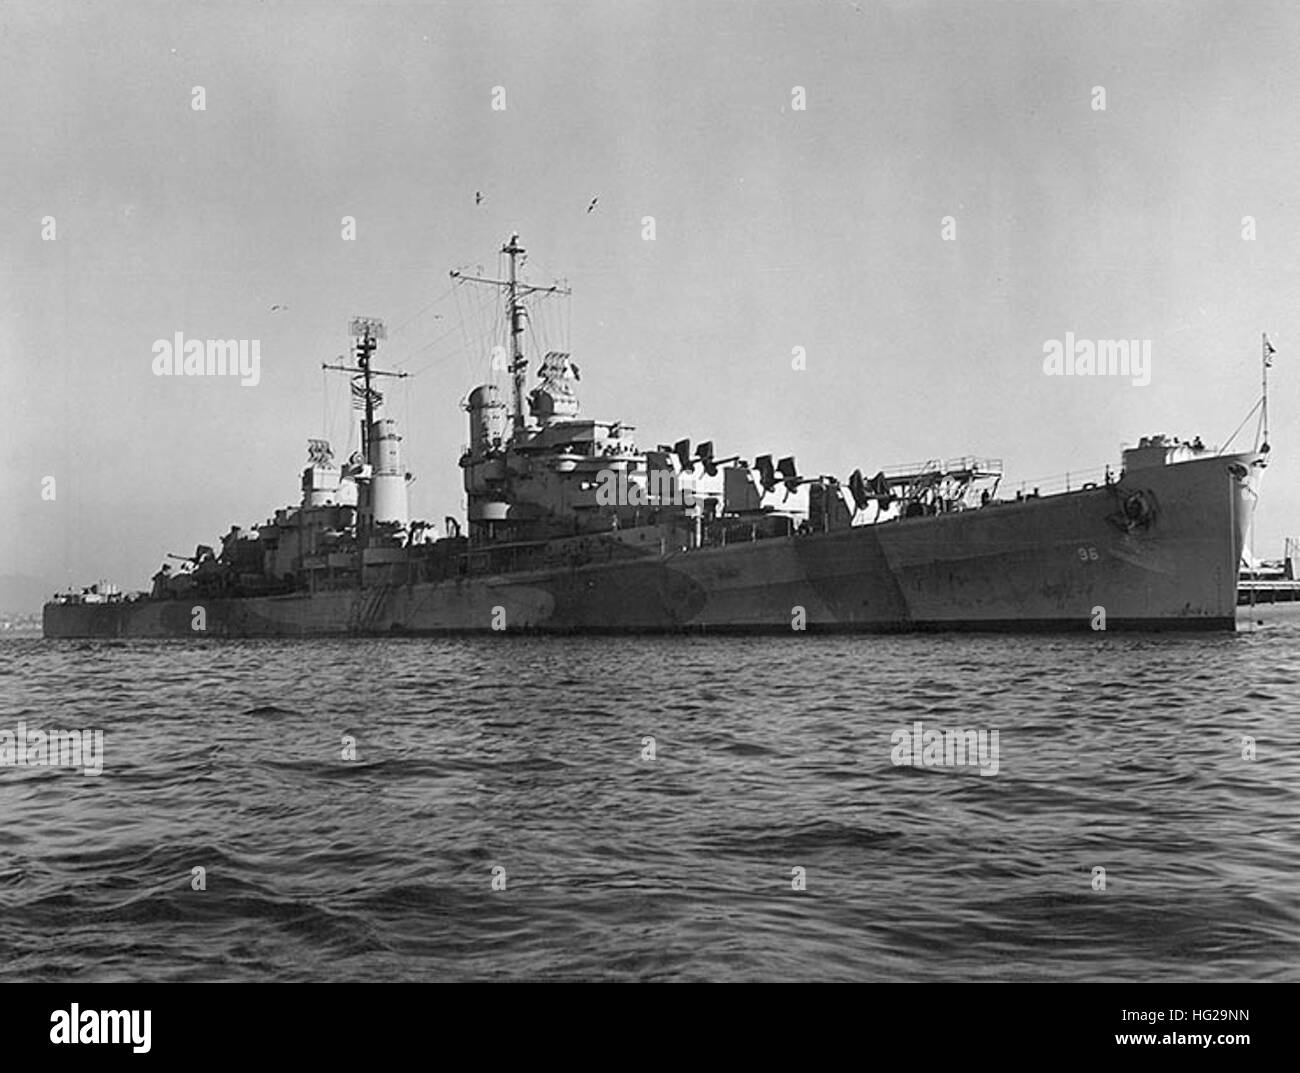 USS Reno (CL-96), probably photographed in San Francisco Bay, California, at the time of her builder's trials, circa late 1943. Reno was constructed by the Bethlehem Steel Company's San Francisco shipyard. The company flag is flying from her jackstaff.  Official U.S. Navy Photograph, from the collections of the Naval History and Heritage Command. USS Reno (CL-96) in San Francisco Bay in late 1943 Stock Photo